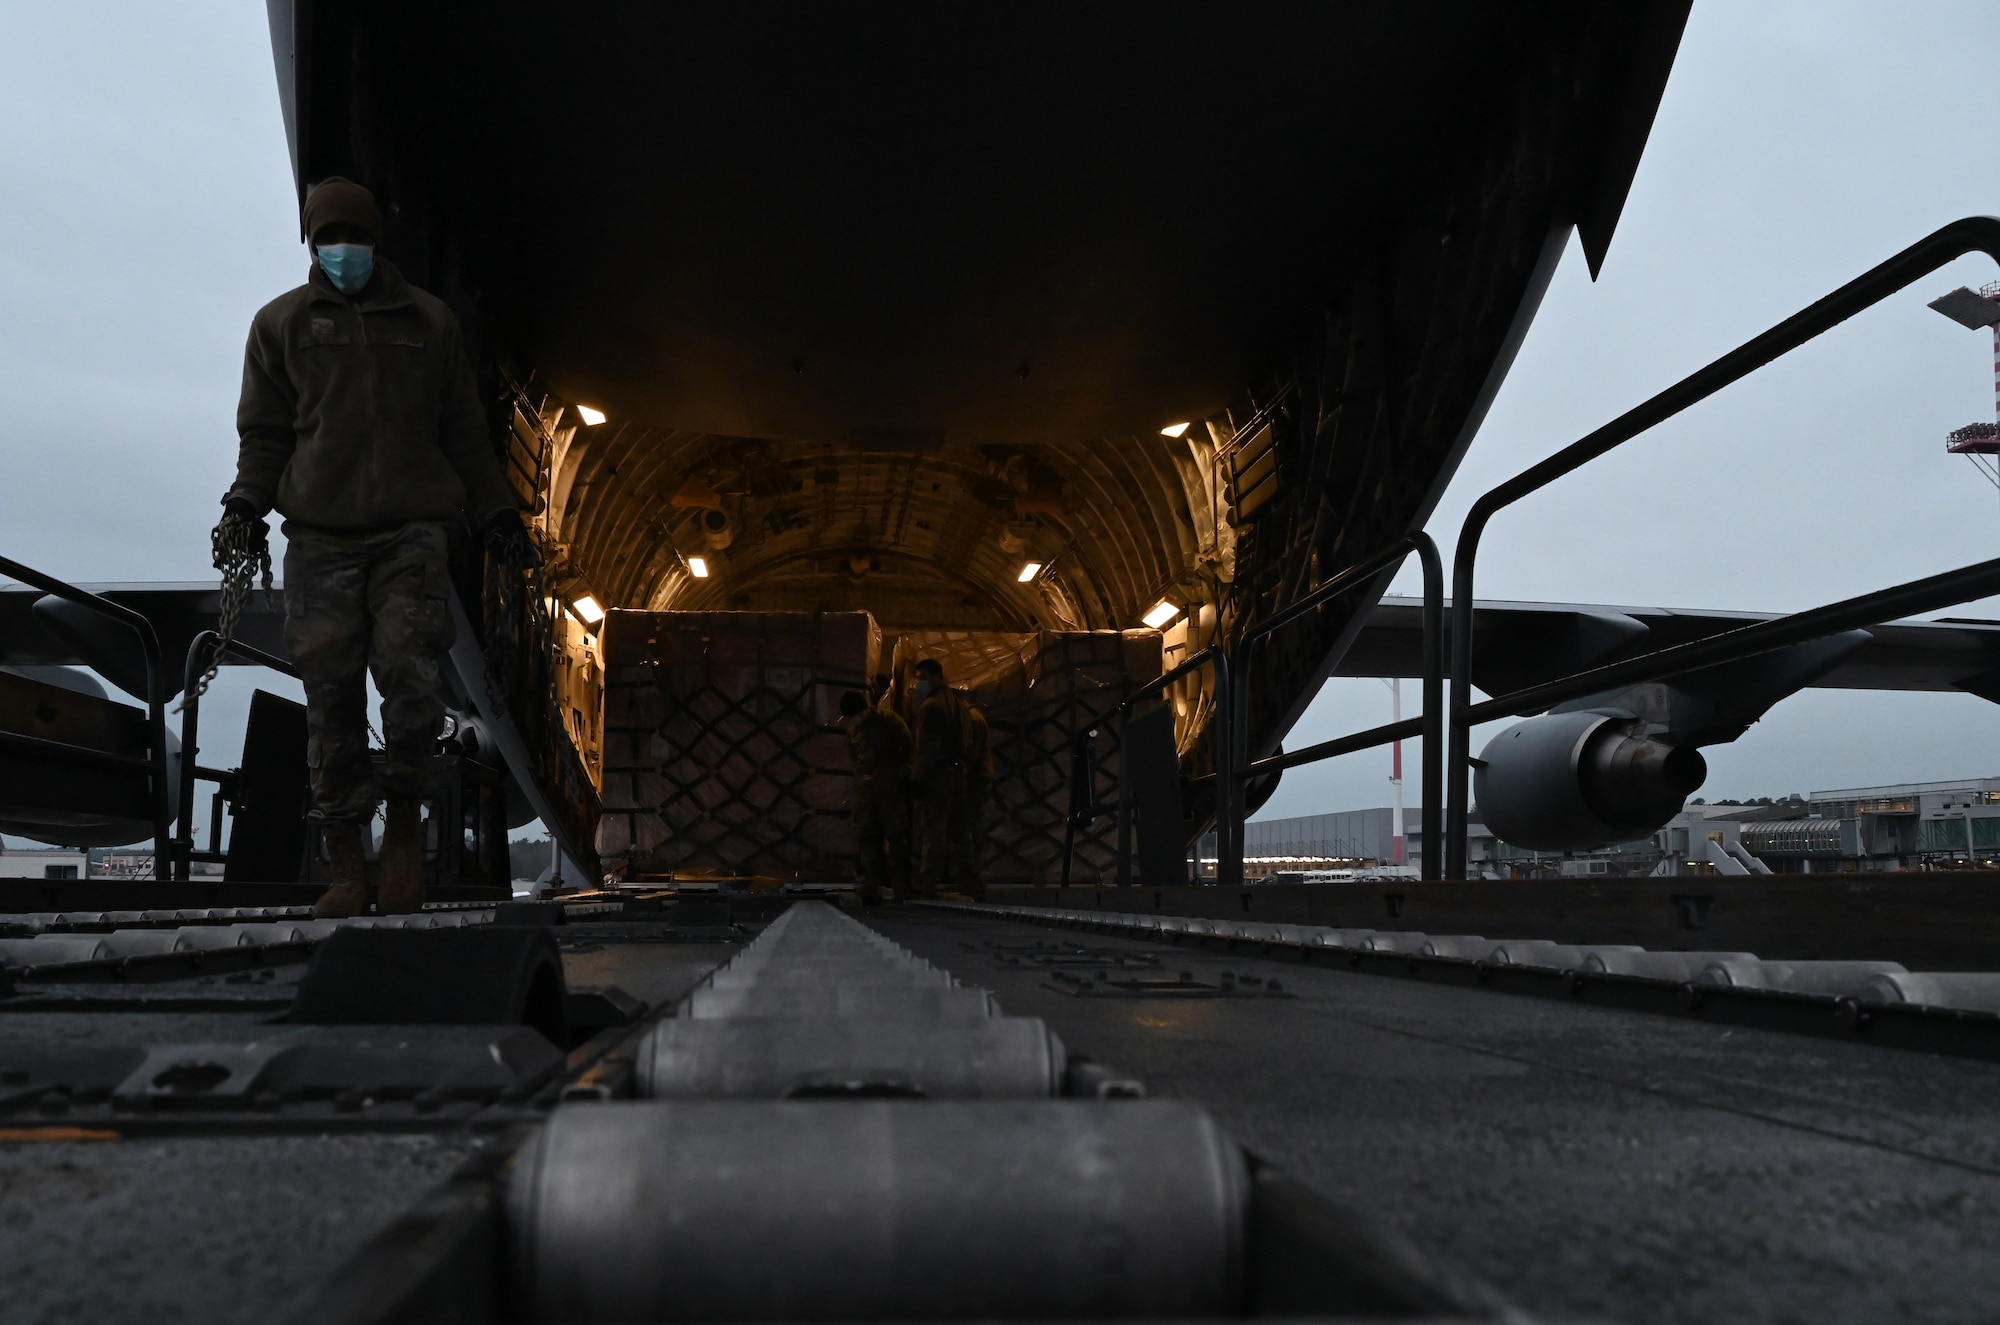 Airmen from the 721st Aerial Port Squadron unload a C-17 Globemaster III at Ramstein Air Base, Germany, Feb. 2, 2021. Ramstein received 15 pallets of masks for distribution to U.S. military bases around Germany. The 721st APS plays an important role in the delivery of masks and other COVID-19 protective equipment. (U.S. Air Force photo by Senior Airman Thomas Karol)